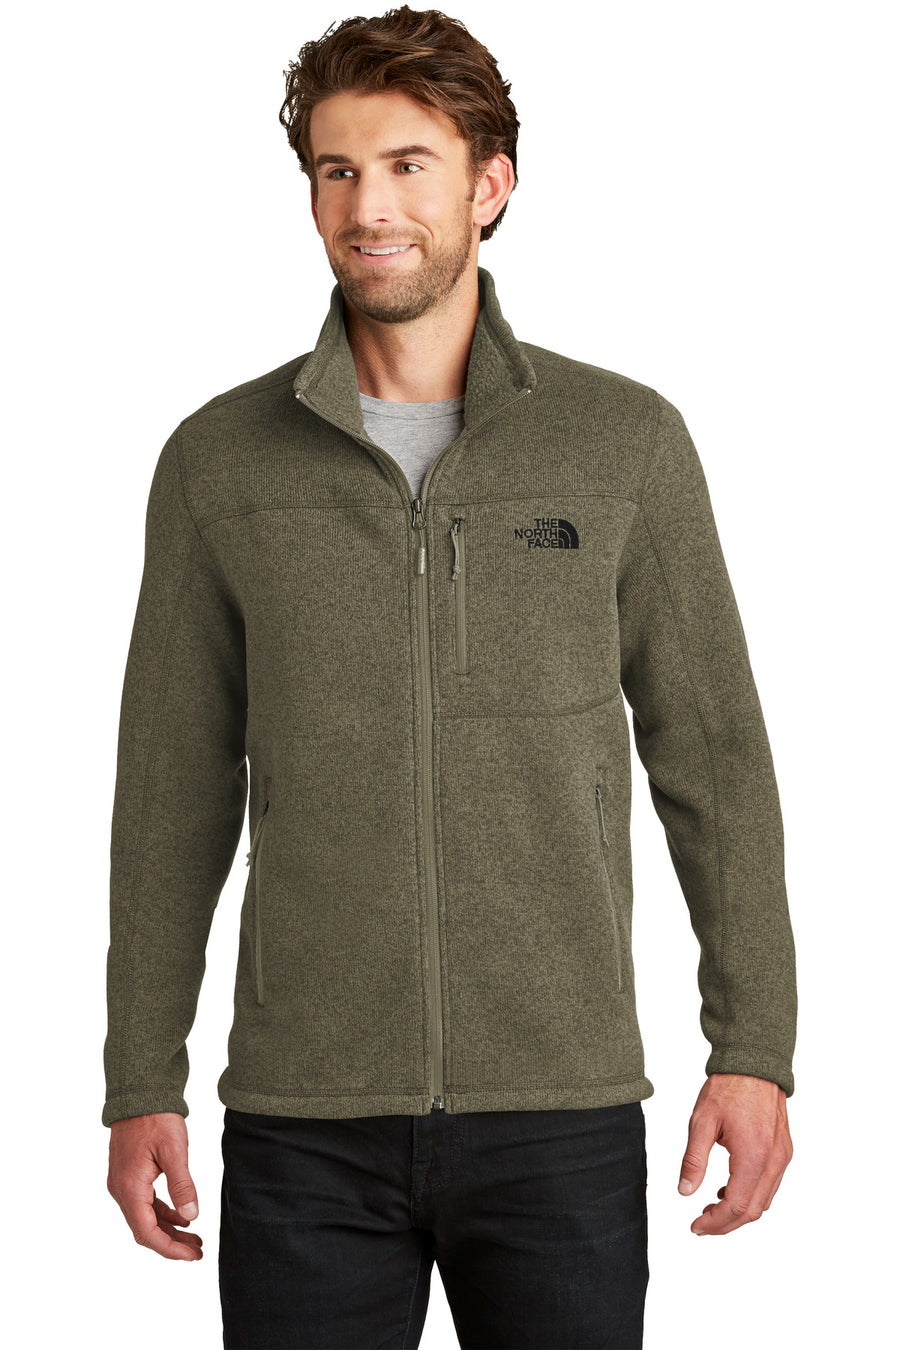 The North Face Sweater Fleece Jacket.